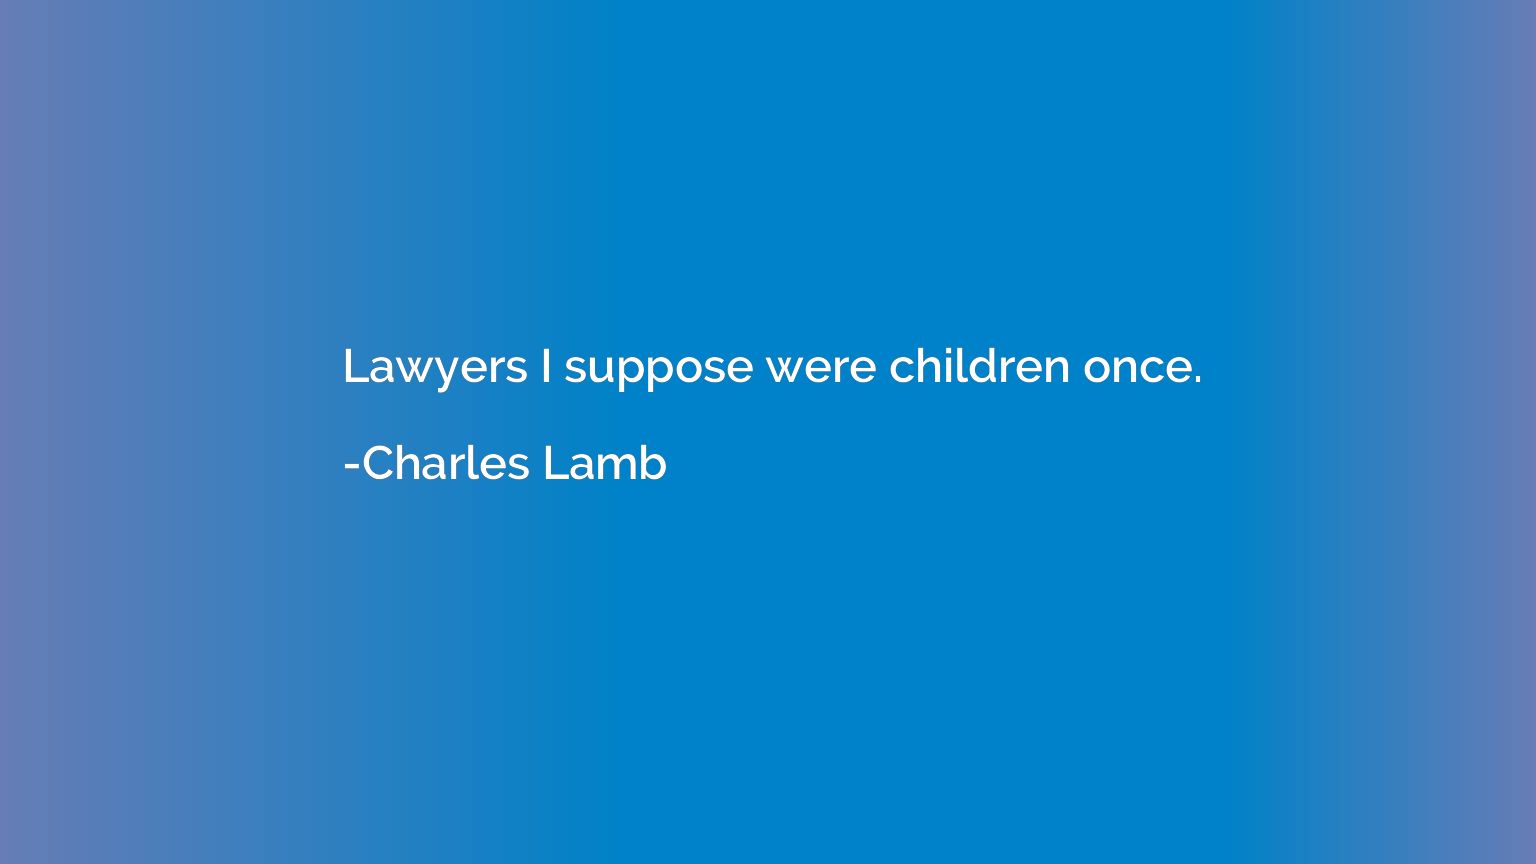 Lawyers I suppose were children once.